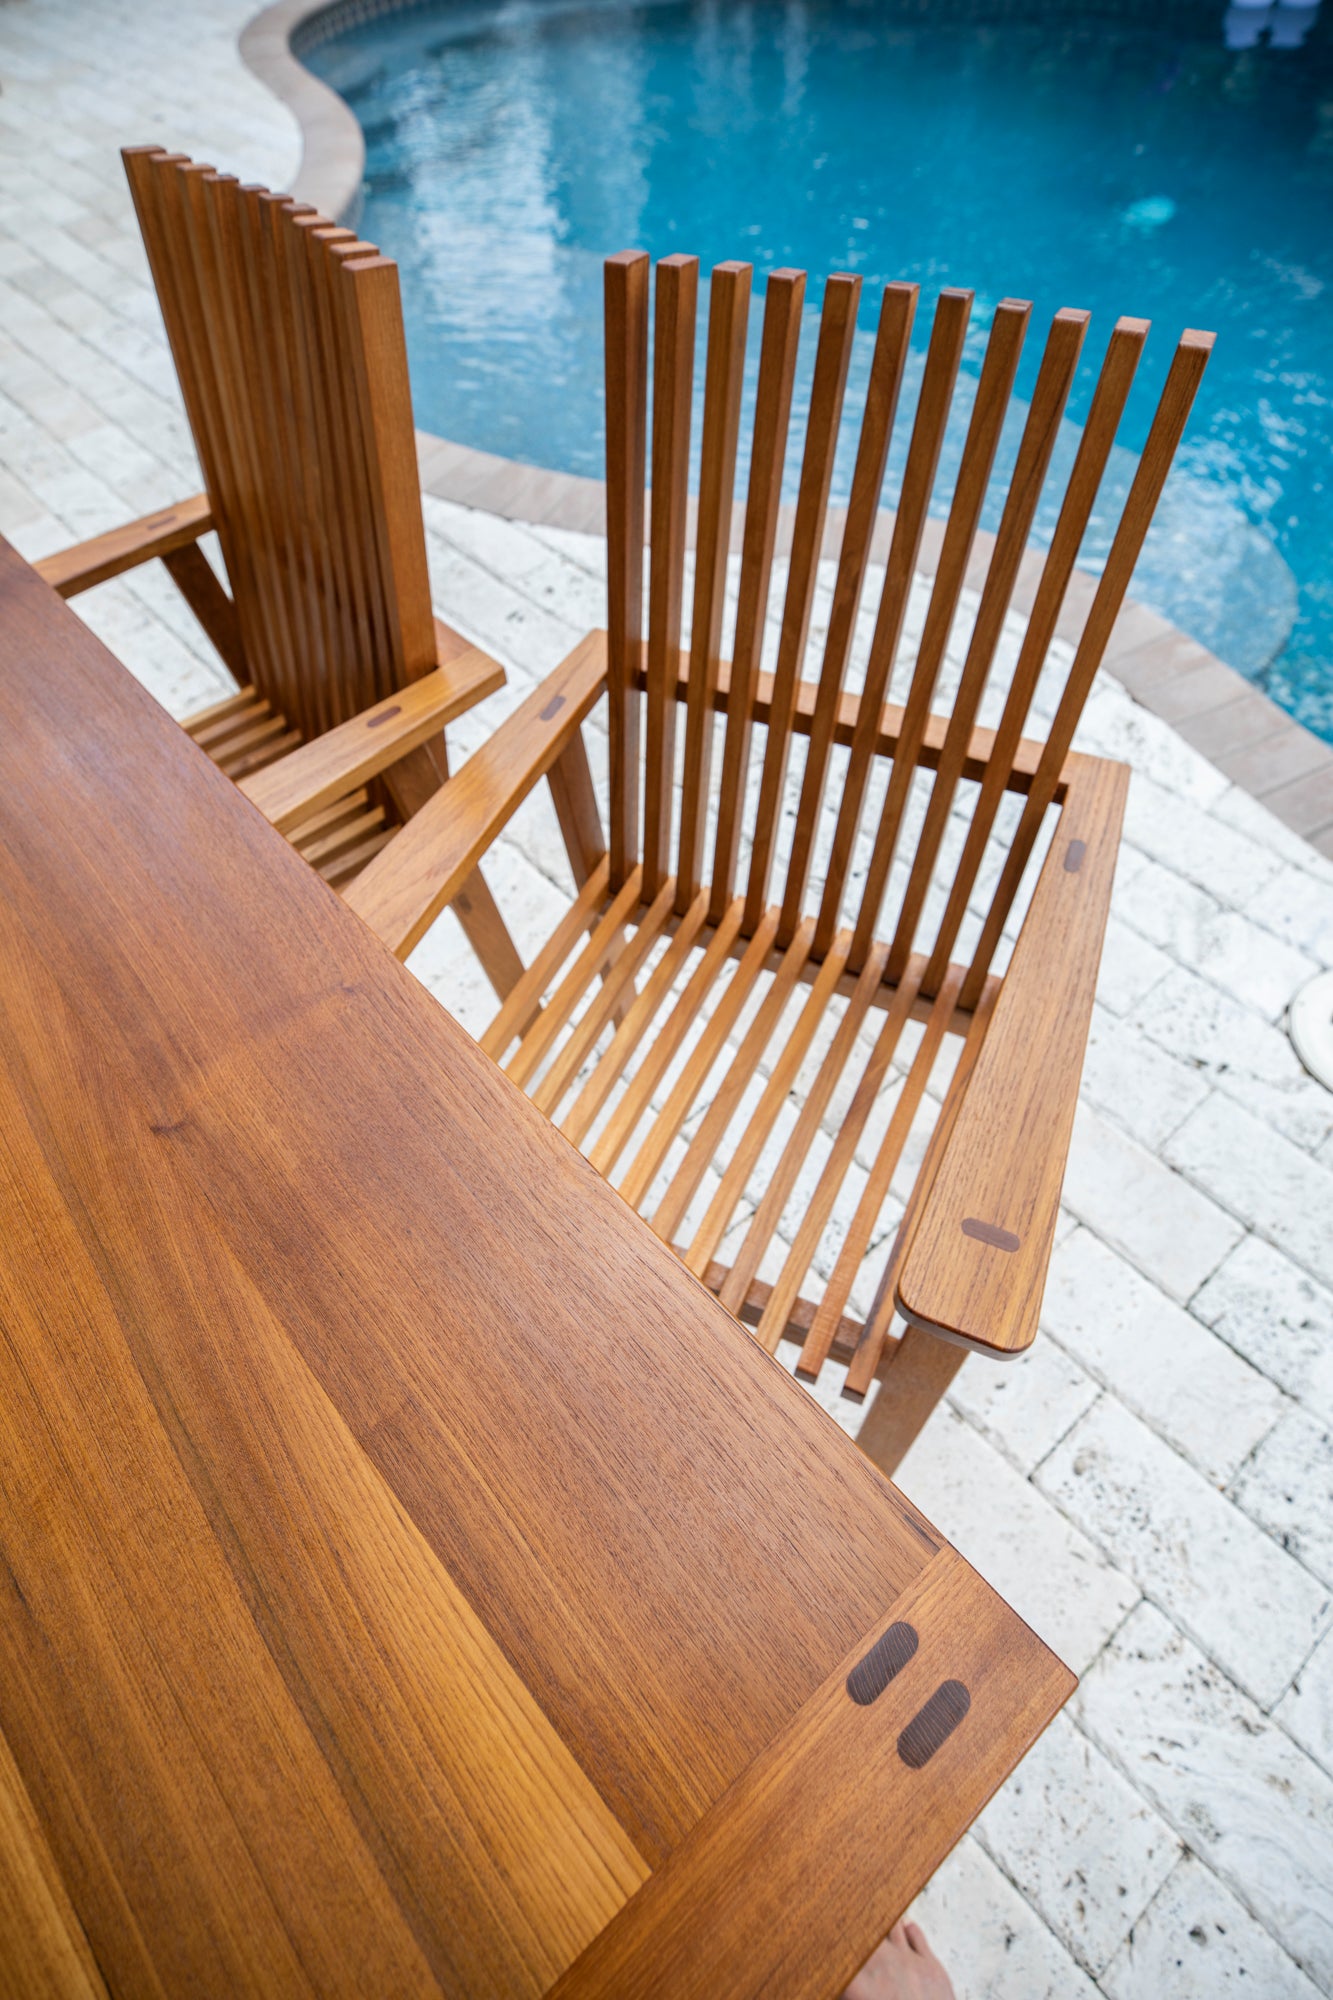 The Teak Outdoor Dining Set, A Table and Four Chairs